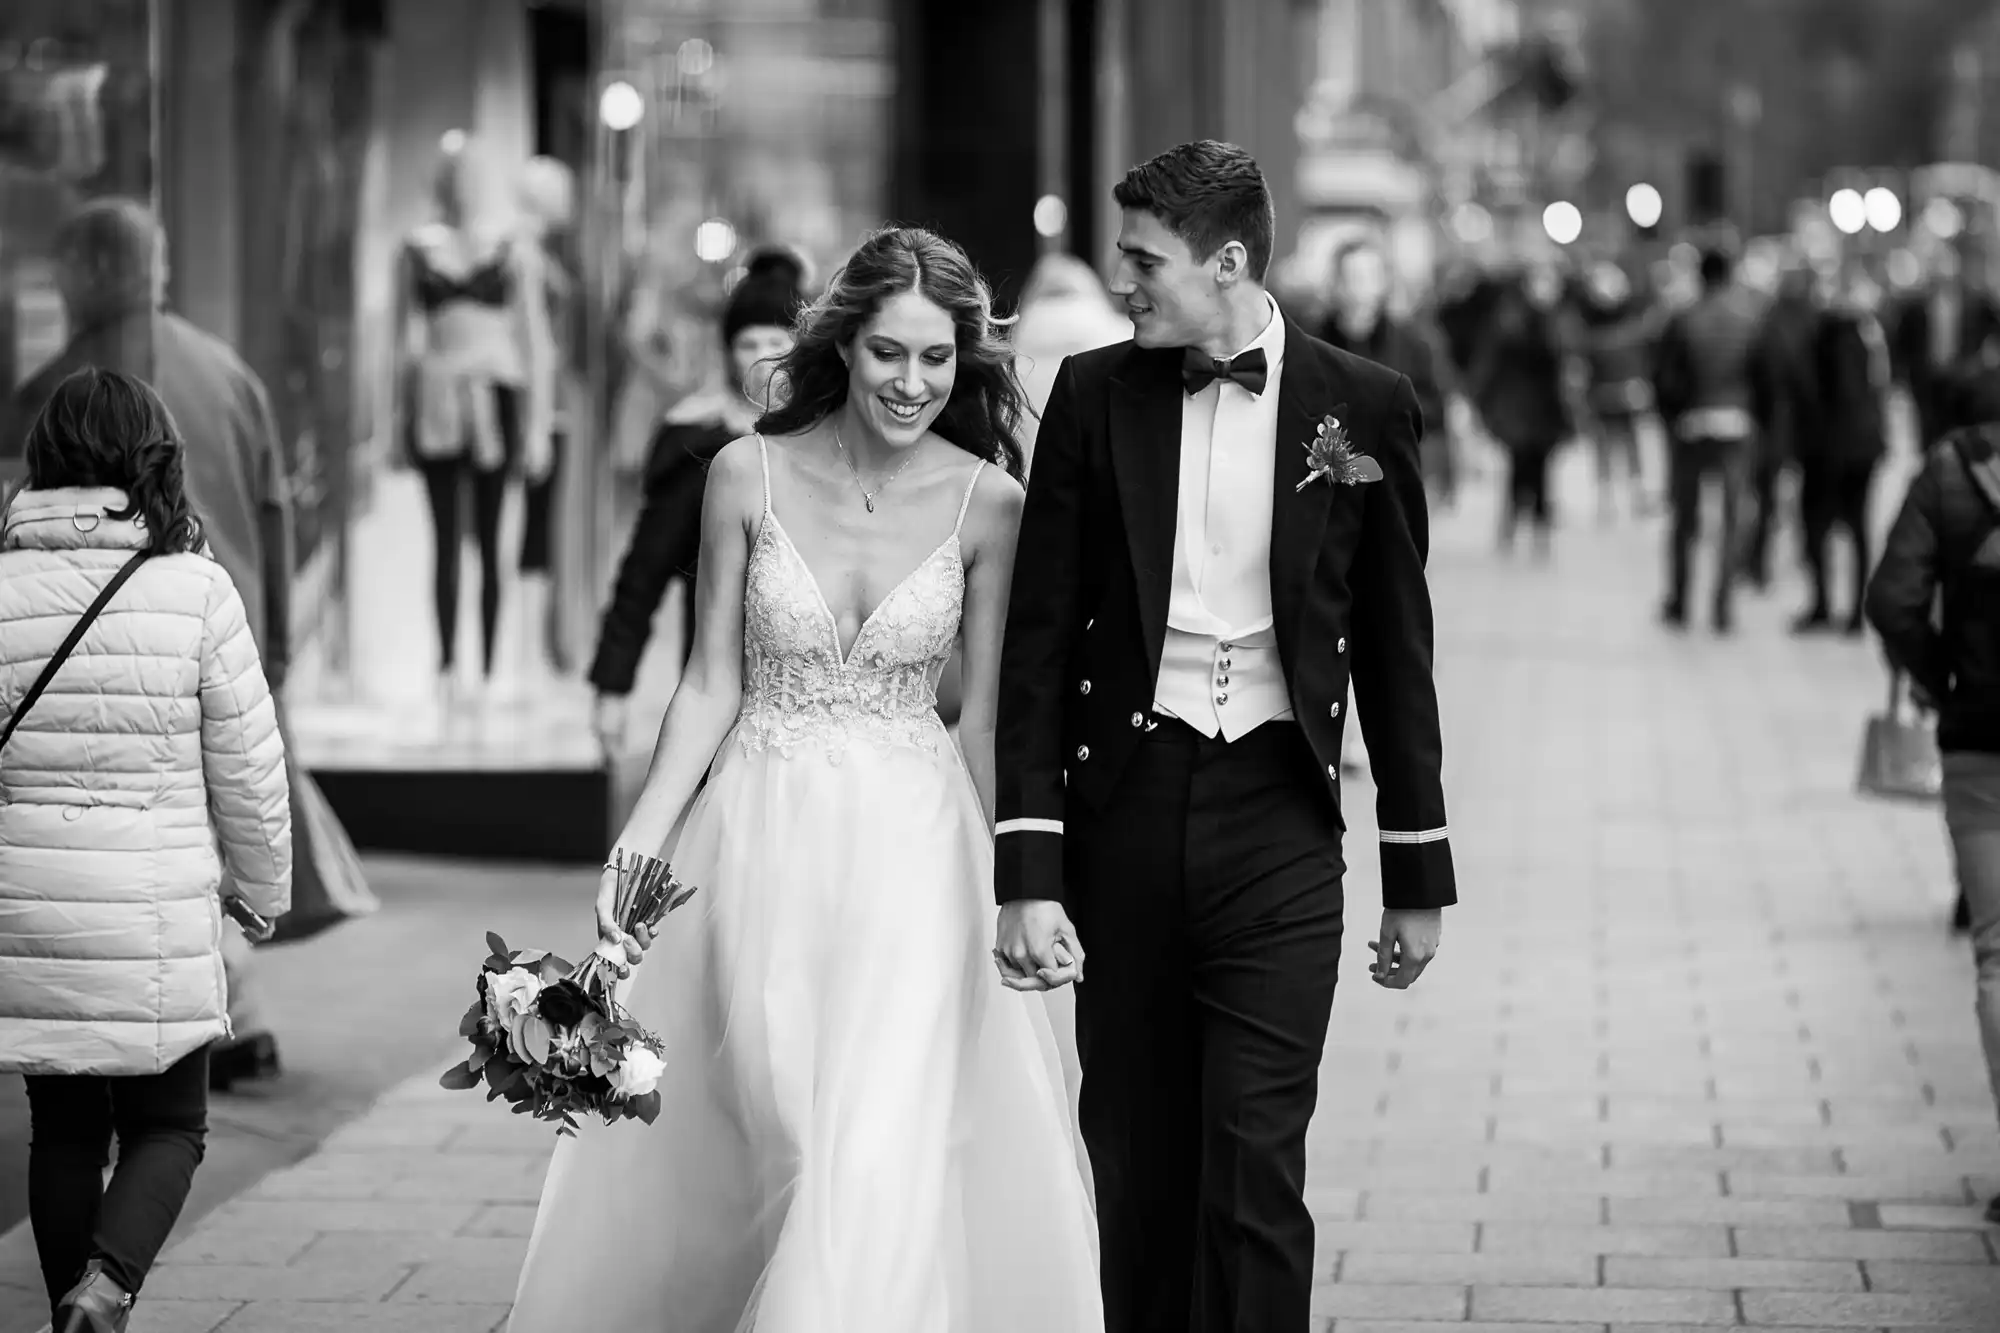 A bride and groom walk hand-in-hand down a busy city street, smiling at each other. The bride holds a bouquet, wearing a wedding dress, while the groom wears a suit and boutonniere.